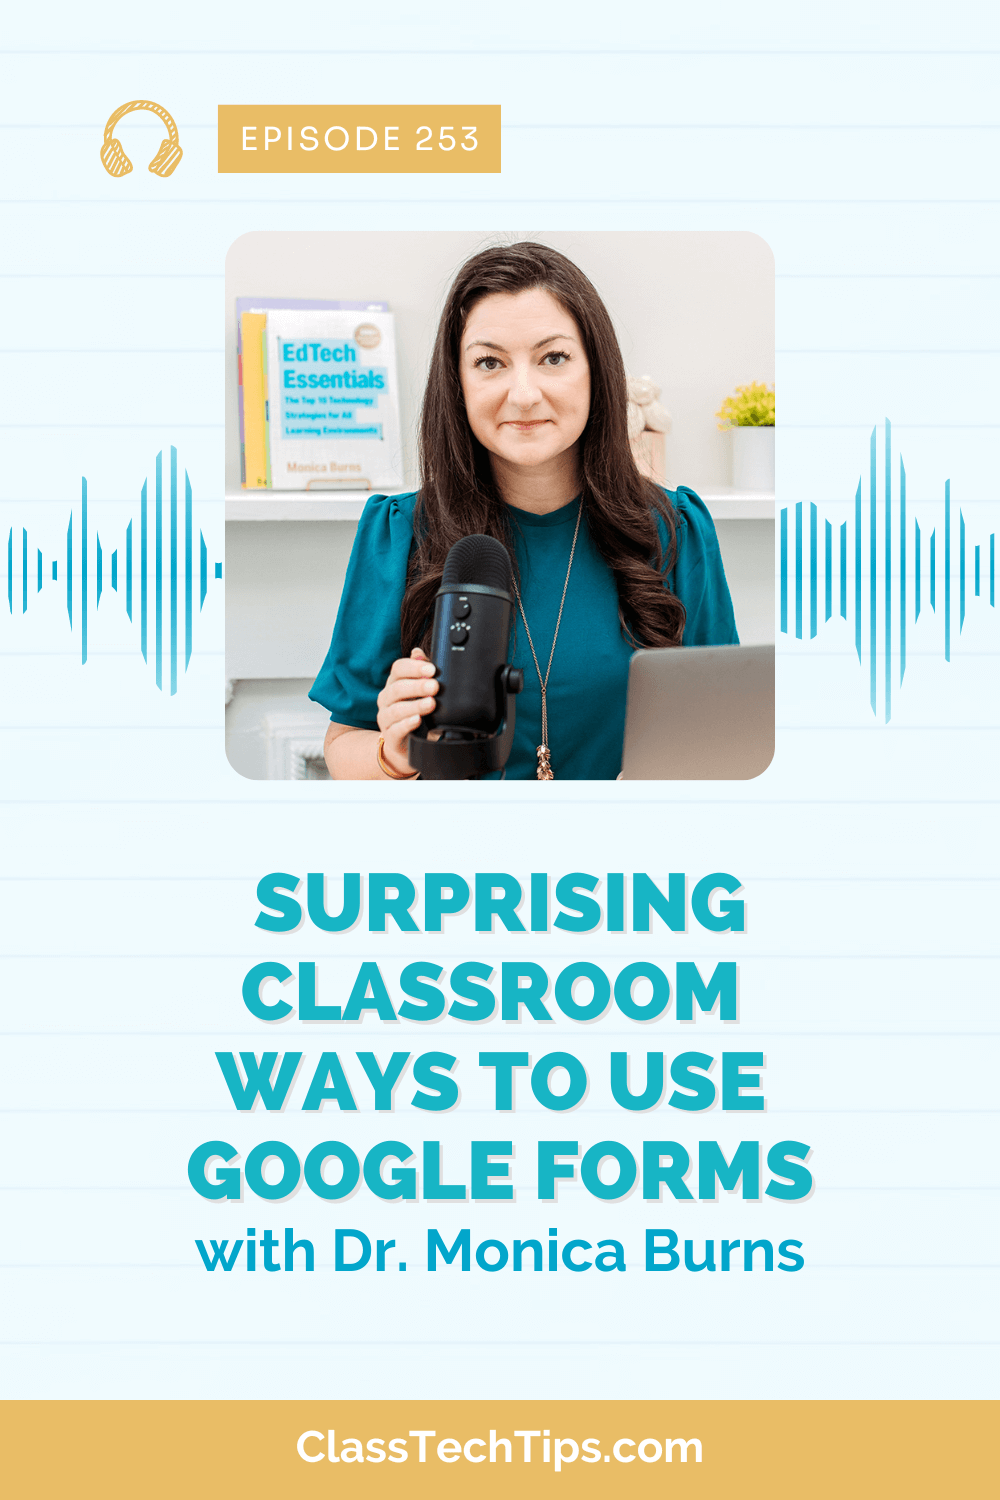 Monica Burns records a podcast episode at her desk, showcasing innovative Google Forms applications for educators.